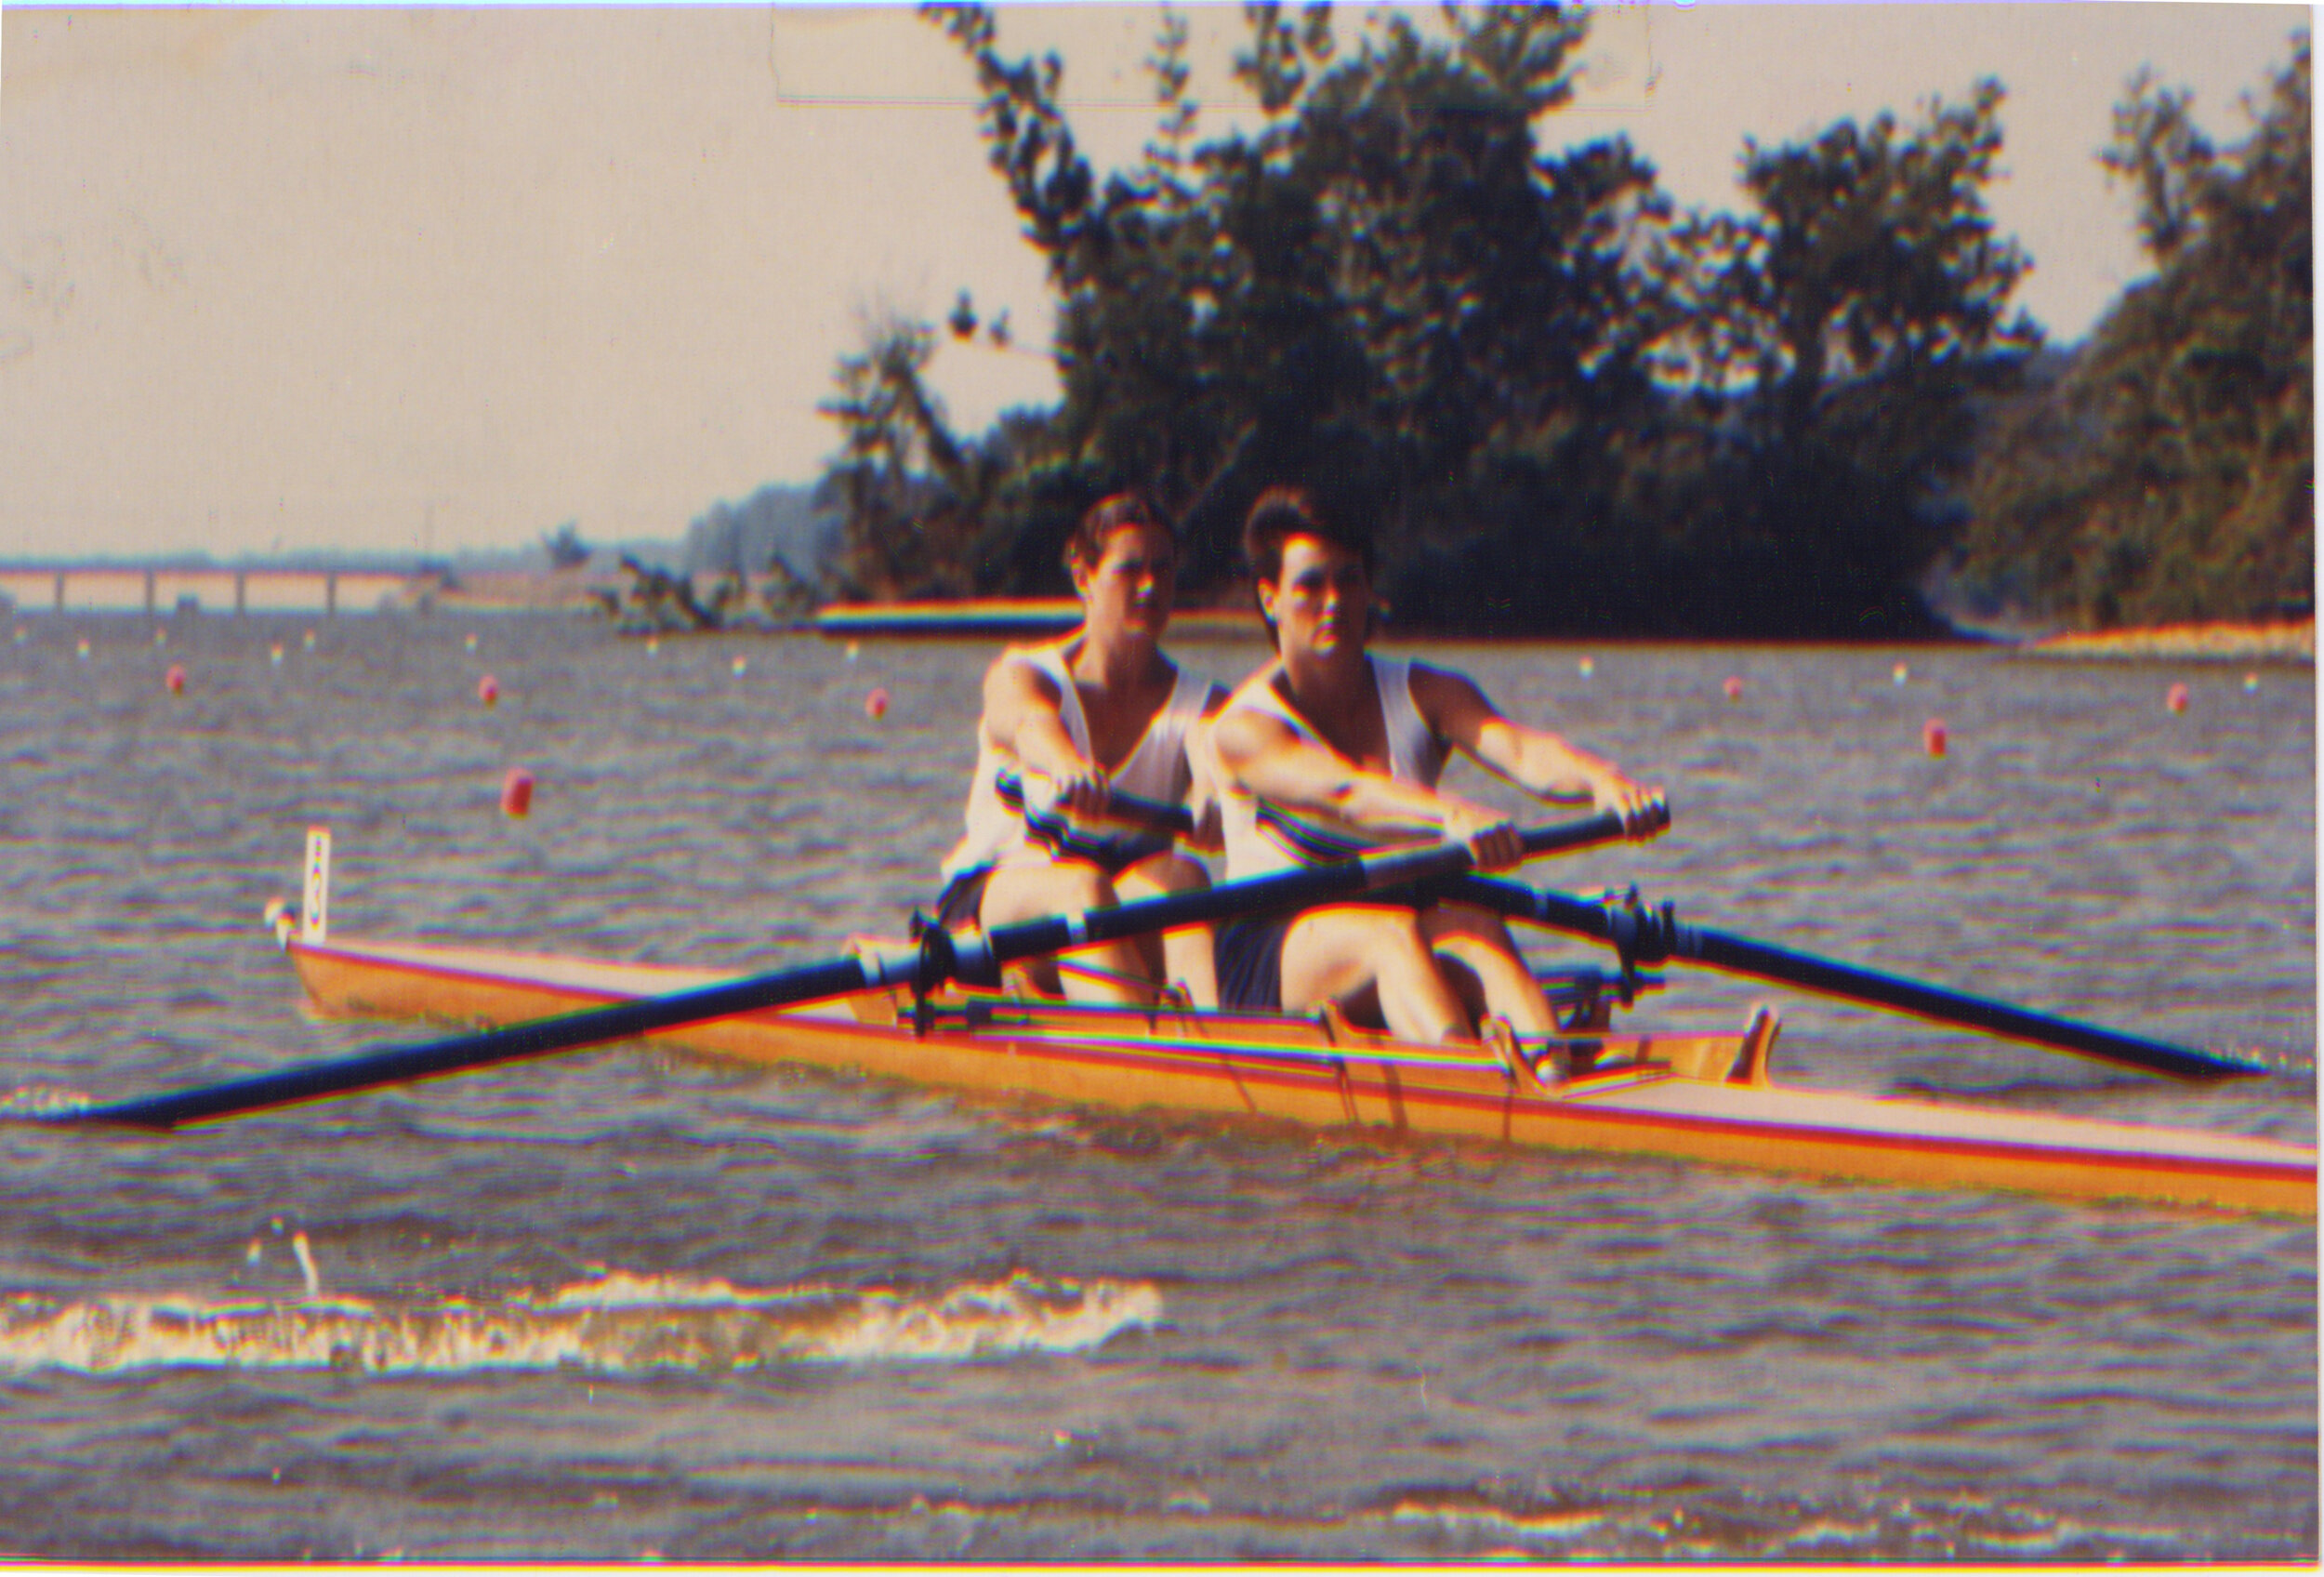  Nevin in bow, with pair with Eleanor McElvaine, Nationals in Indy, 1988. 